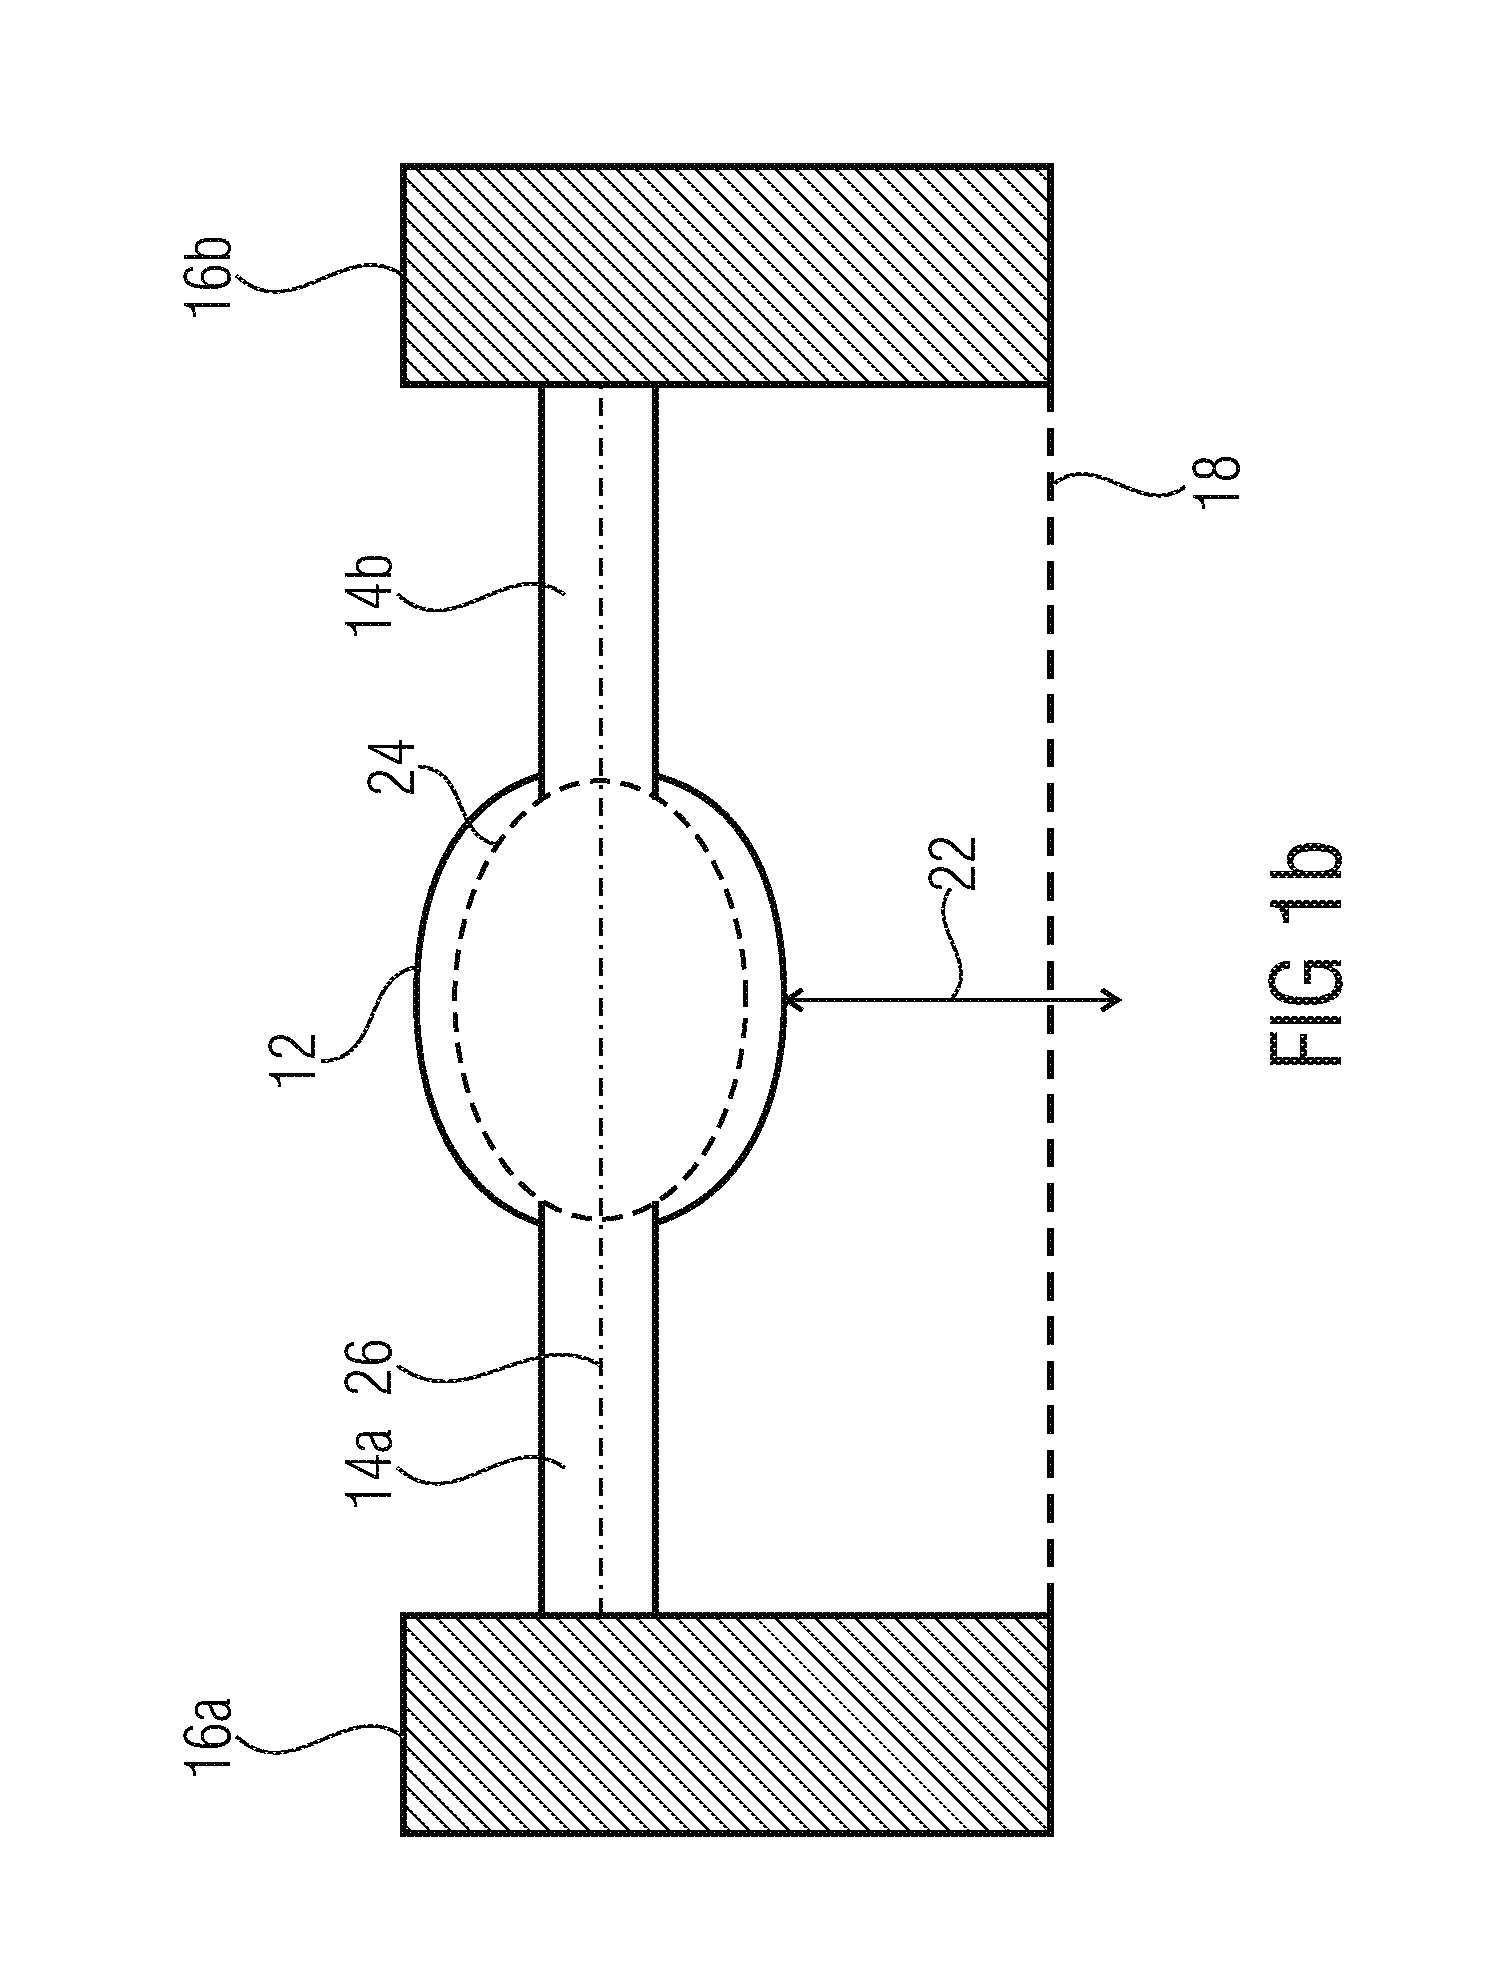 Optical structure with ridges arranged at the same and method for producing the same